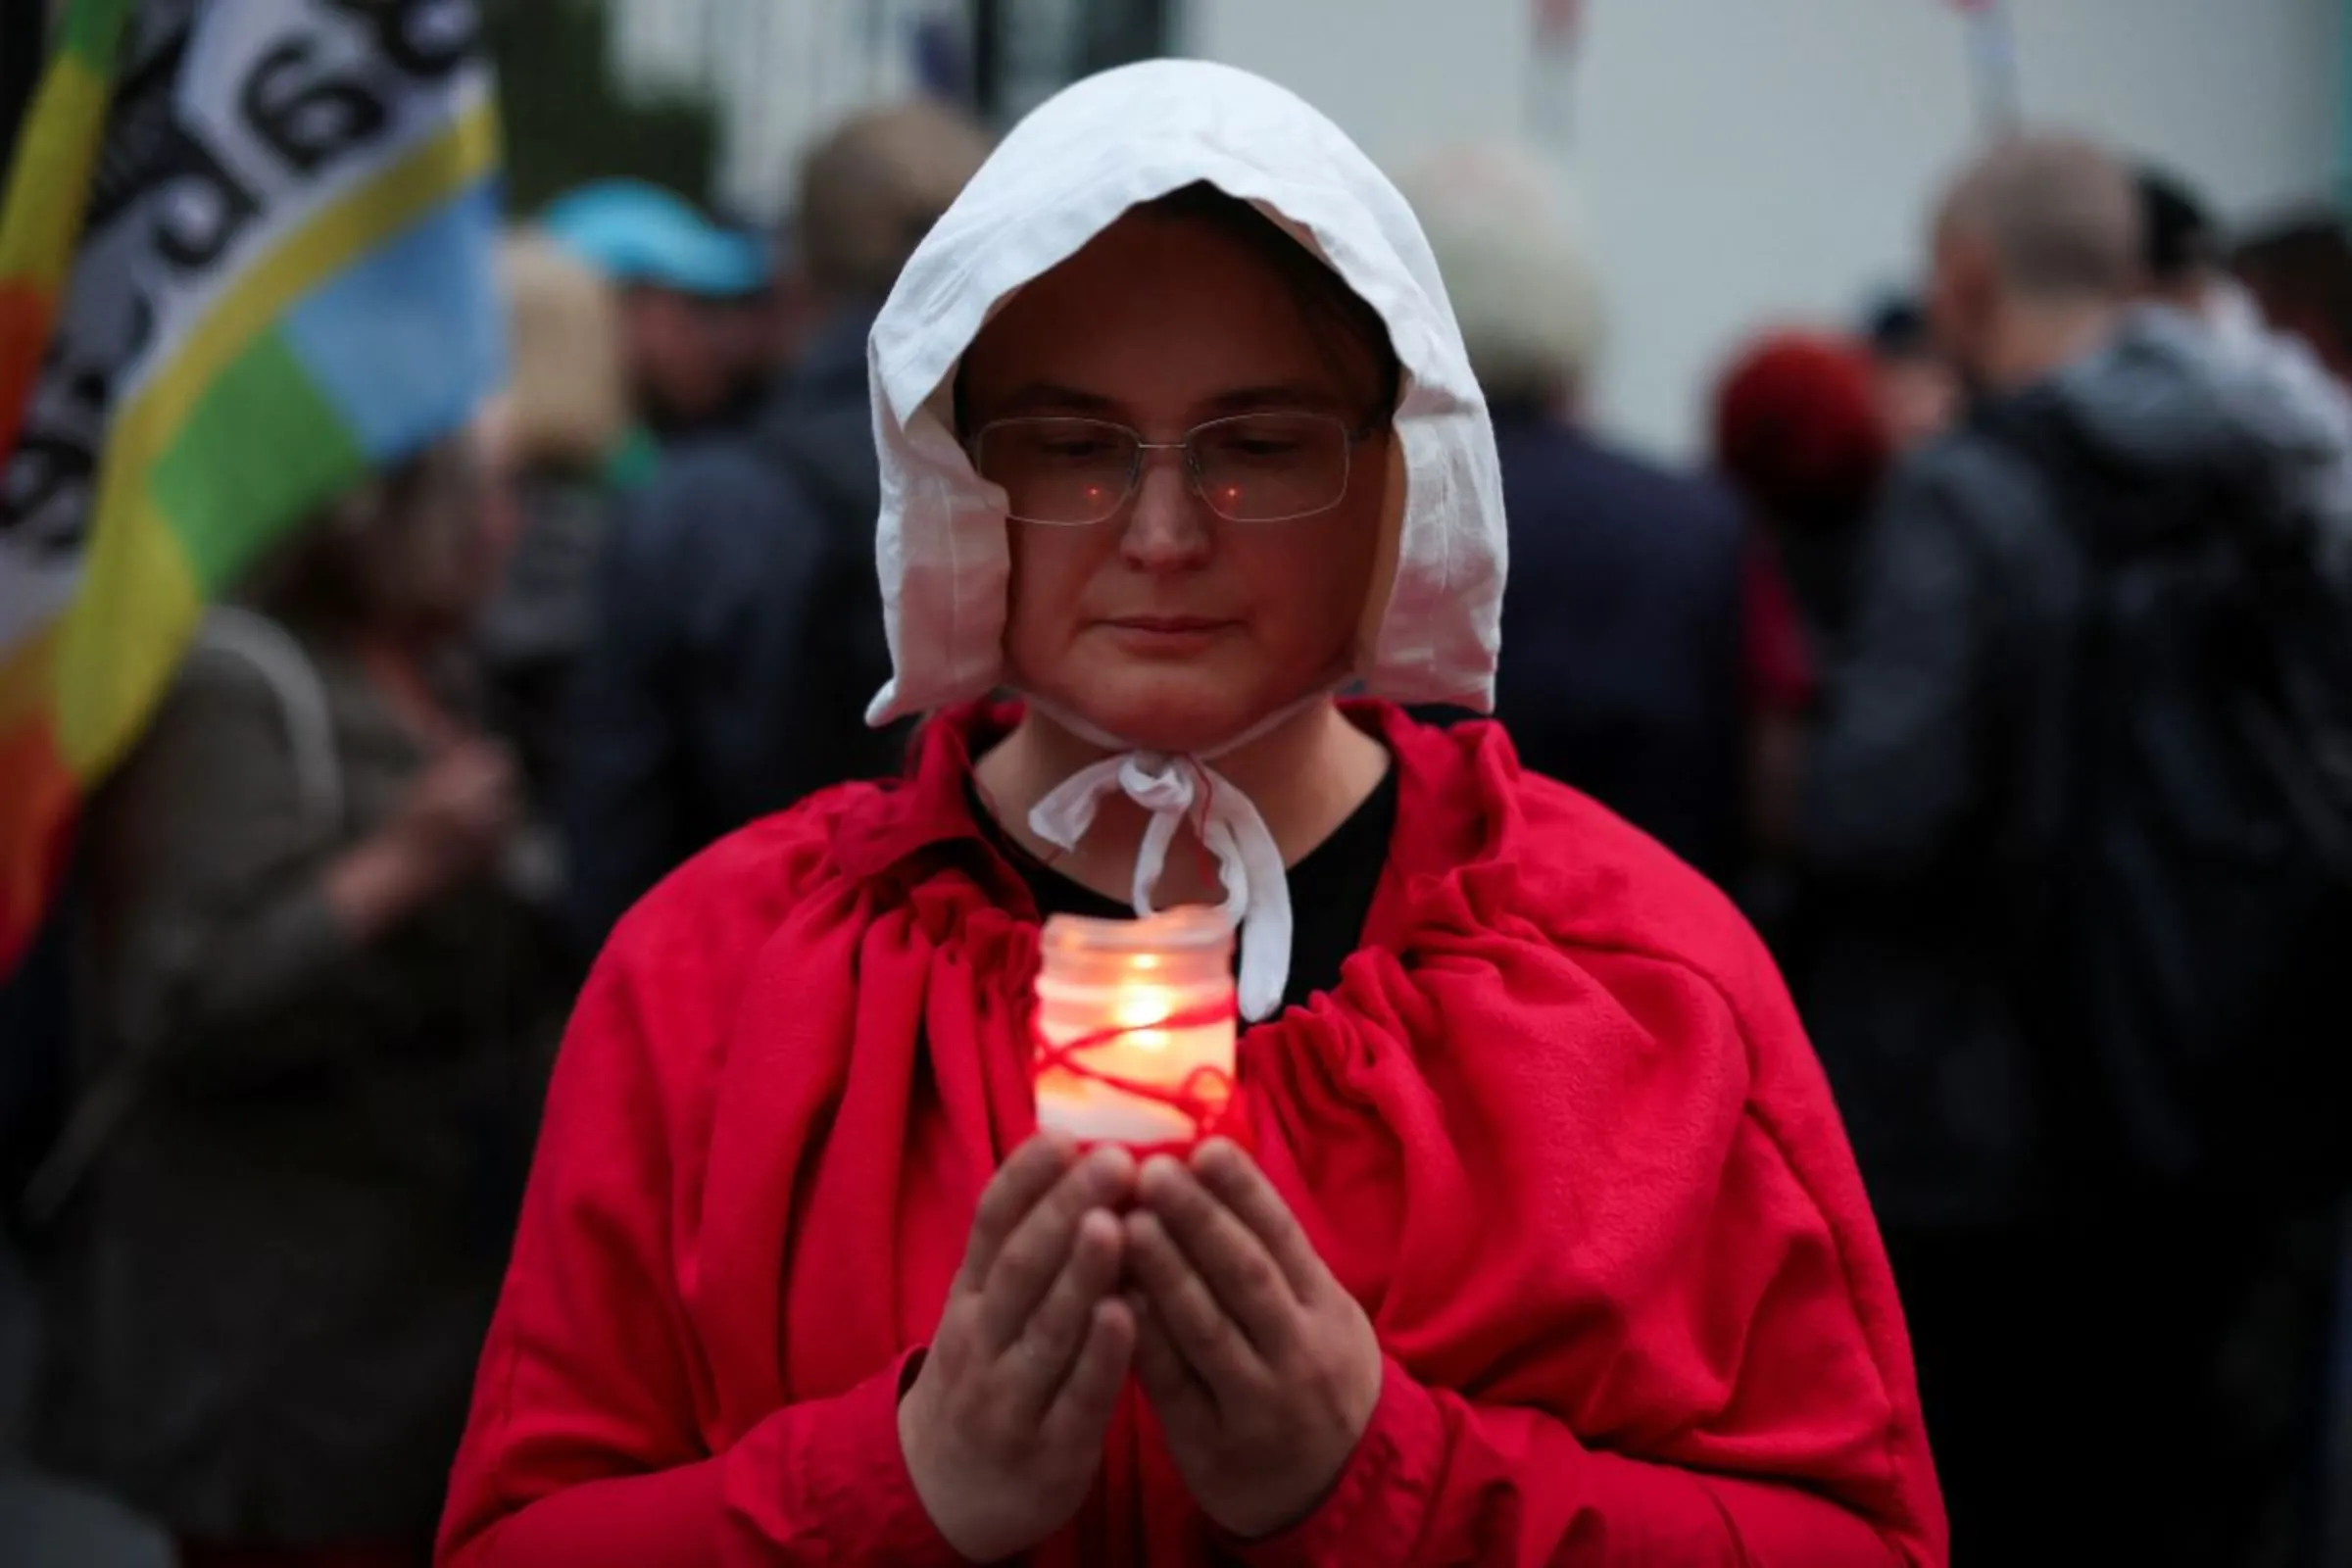 A person wearing a red cape takes part in a protest, after a pregnant woman died in hospital in an incident campaigners say is the fault of Poland's laws on abortion, which are some of the most restrictive in Europe, in Warsaw, Poland June 14, 2023. REUTERS/Kacper Pempel